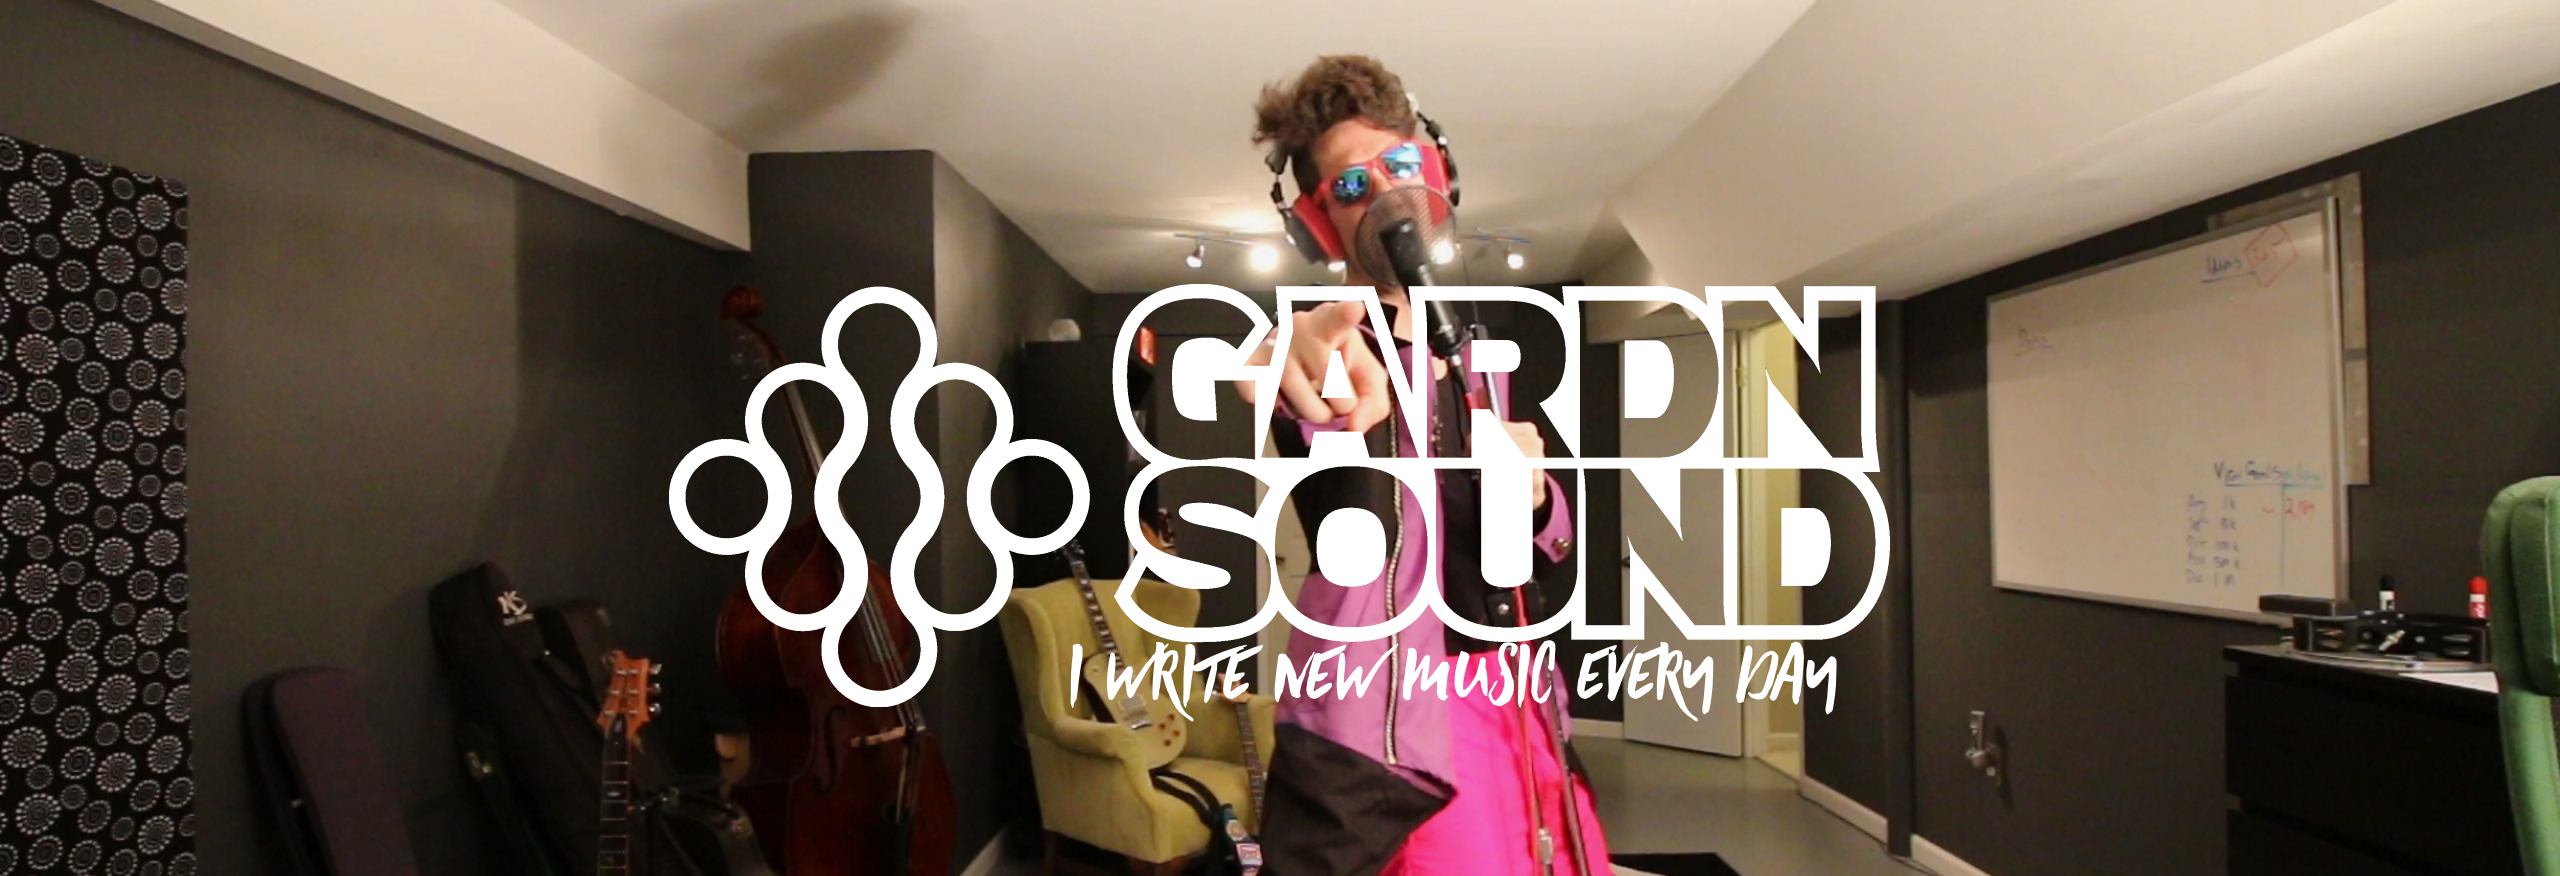 Sowing Songs: Youtuber GARDNSOUND is Crafting a Track Each Day for A Year